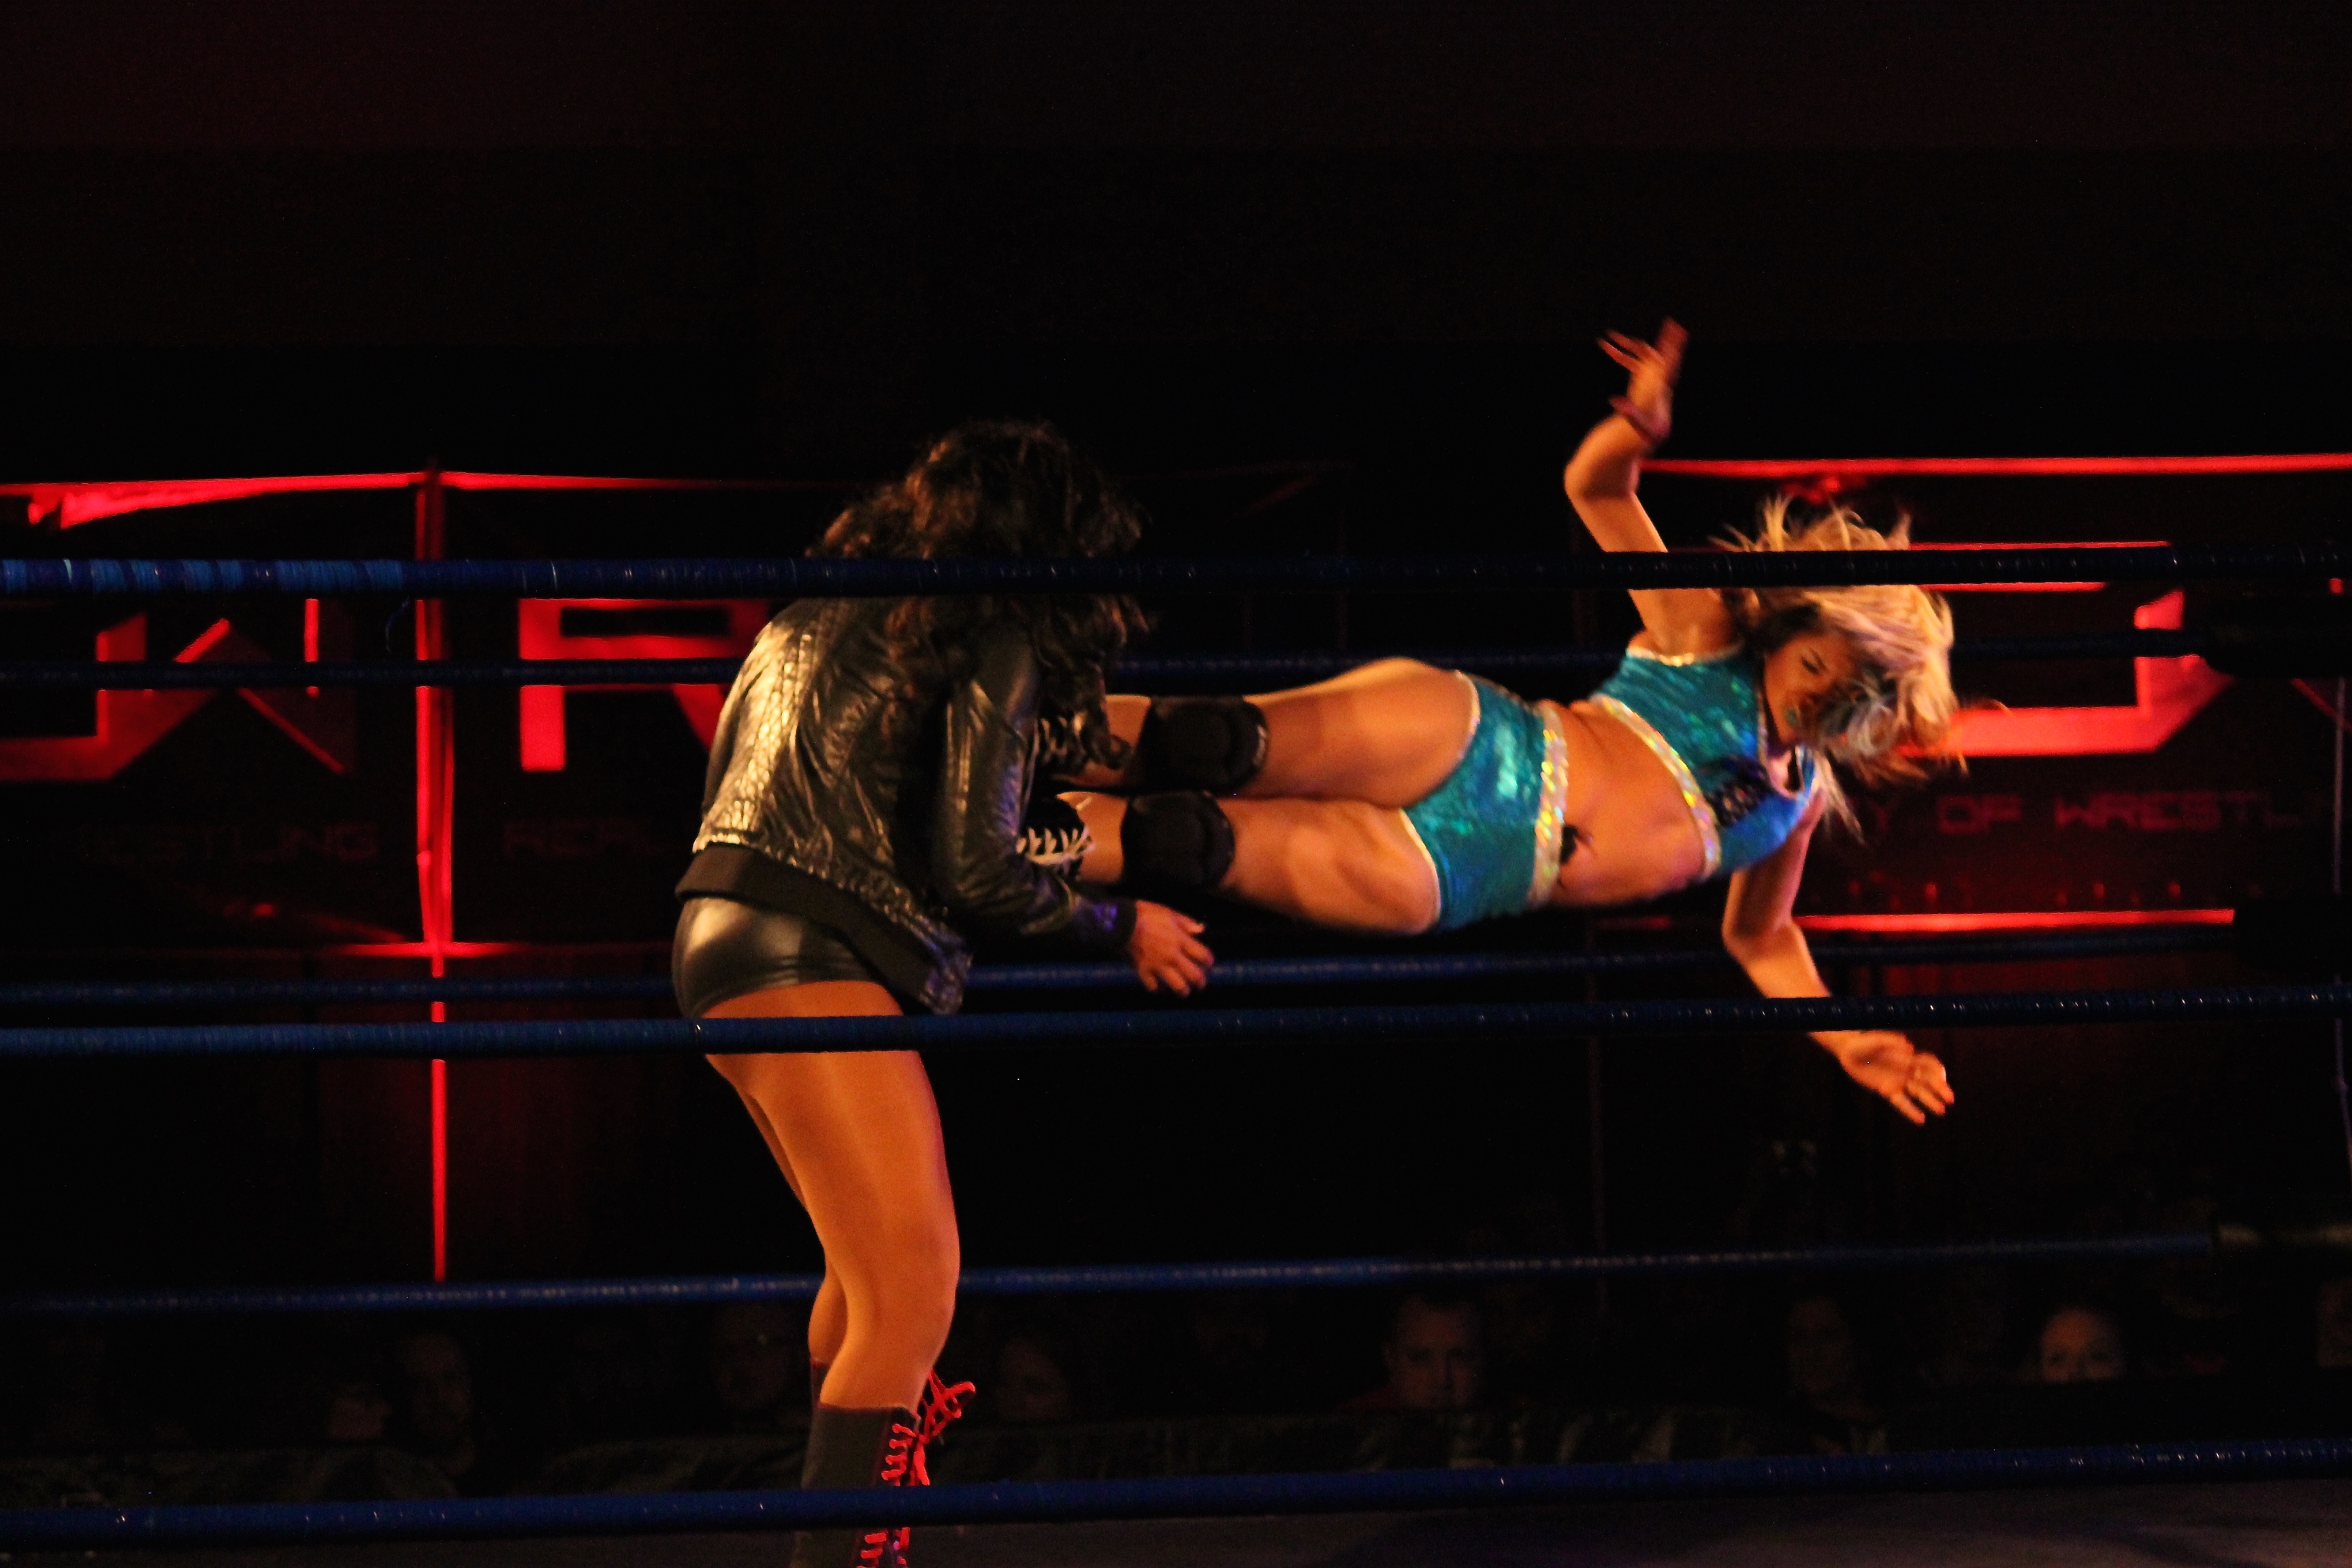 Image: Wrestler Miranda deals heavy blow to the chest of an opponent at the Sept. 13, 2015 Reality of Wrestling event. Photo by The Signal reporter Kyle Harrison.